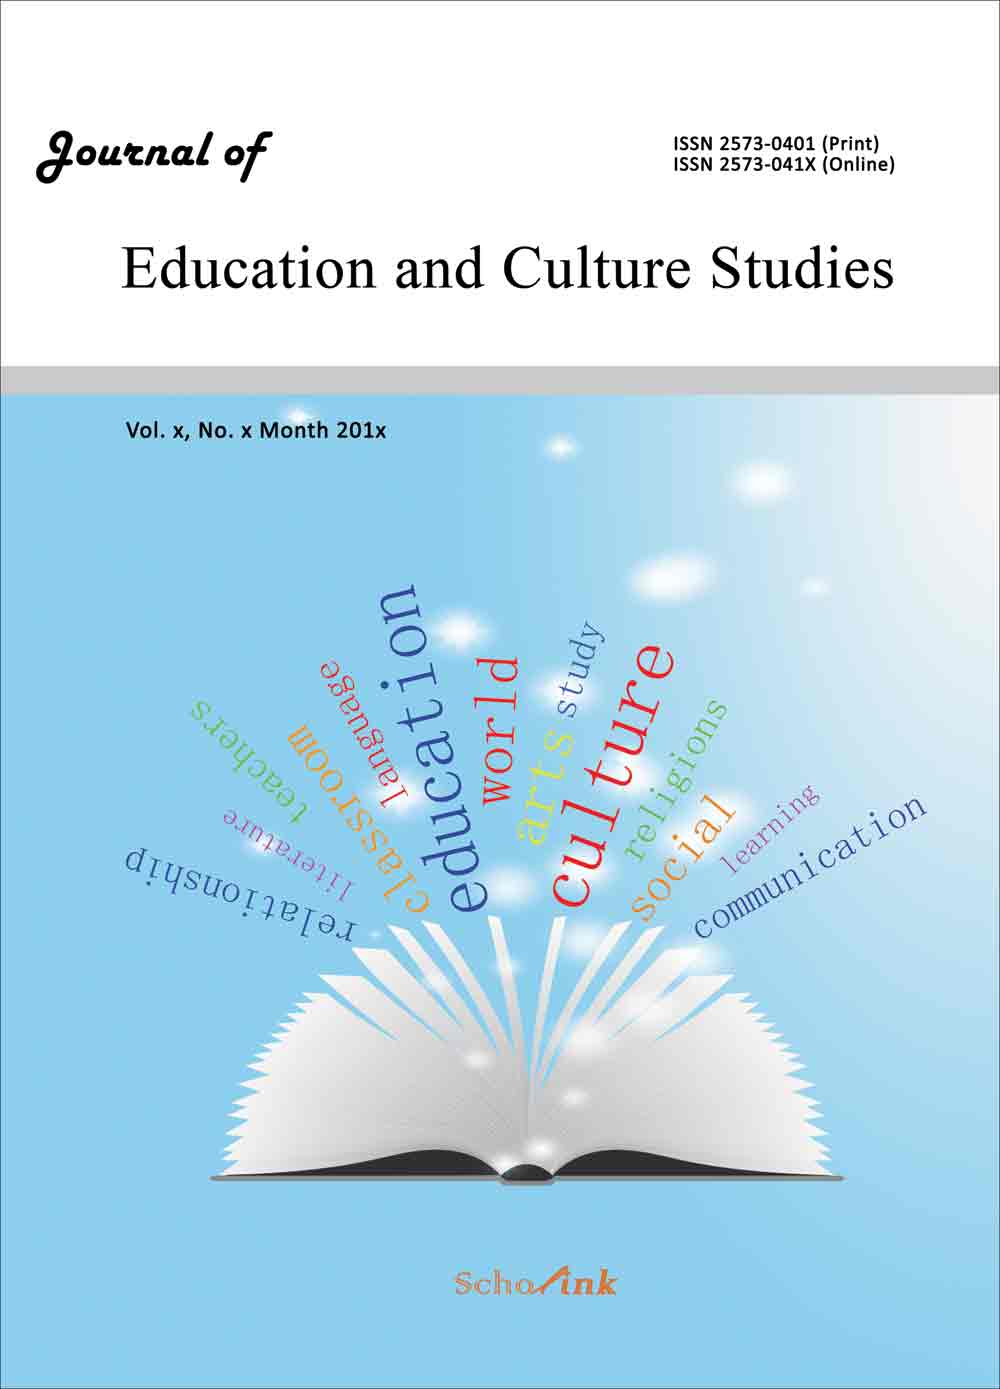 Journal of Education and Culture Studies《教育与文化研究杂志》